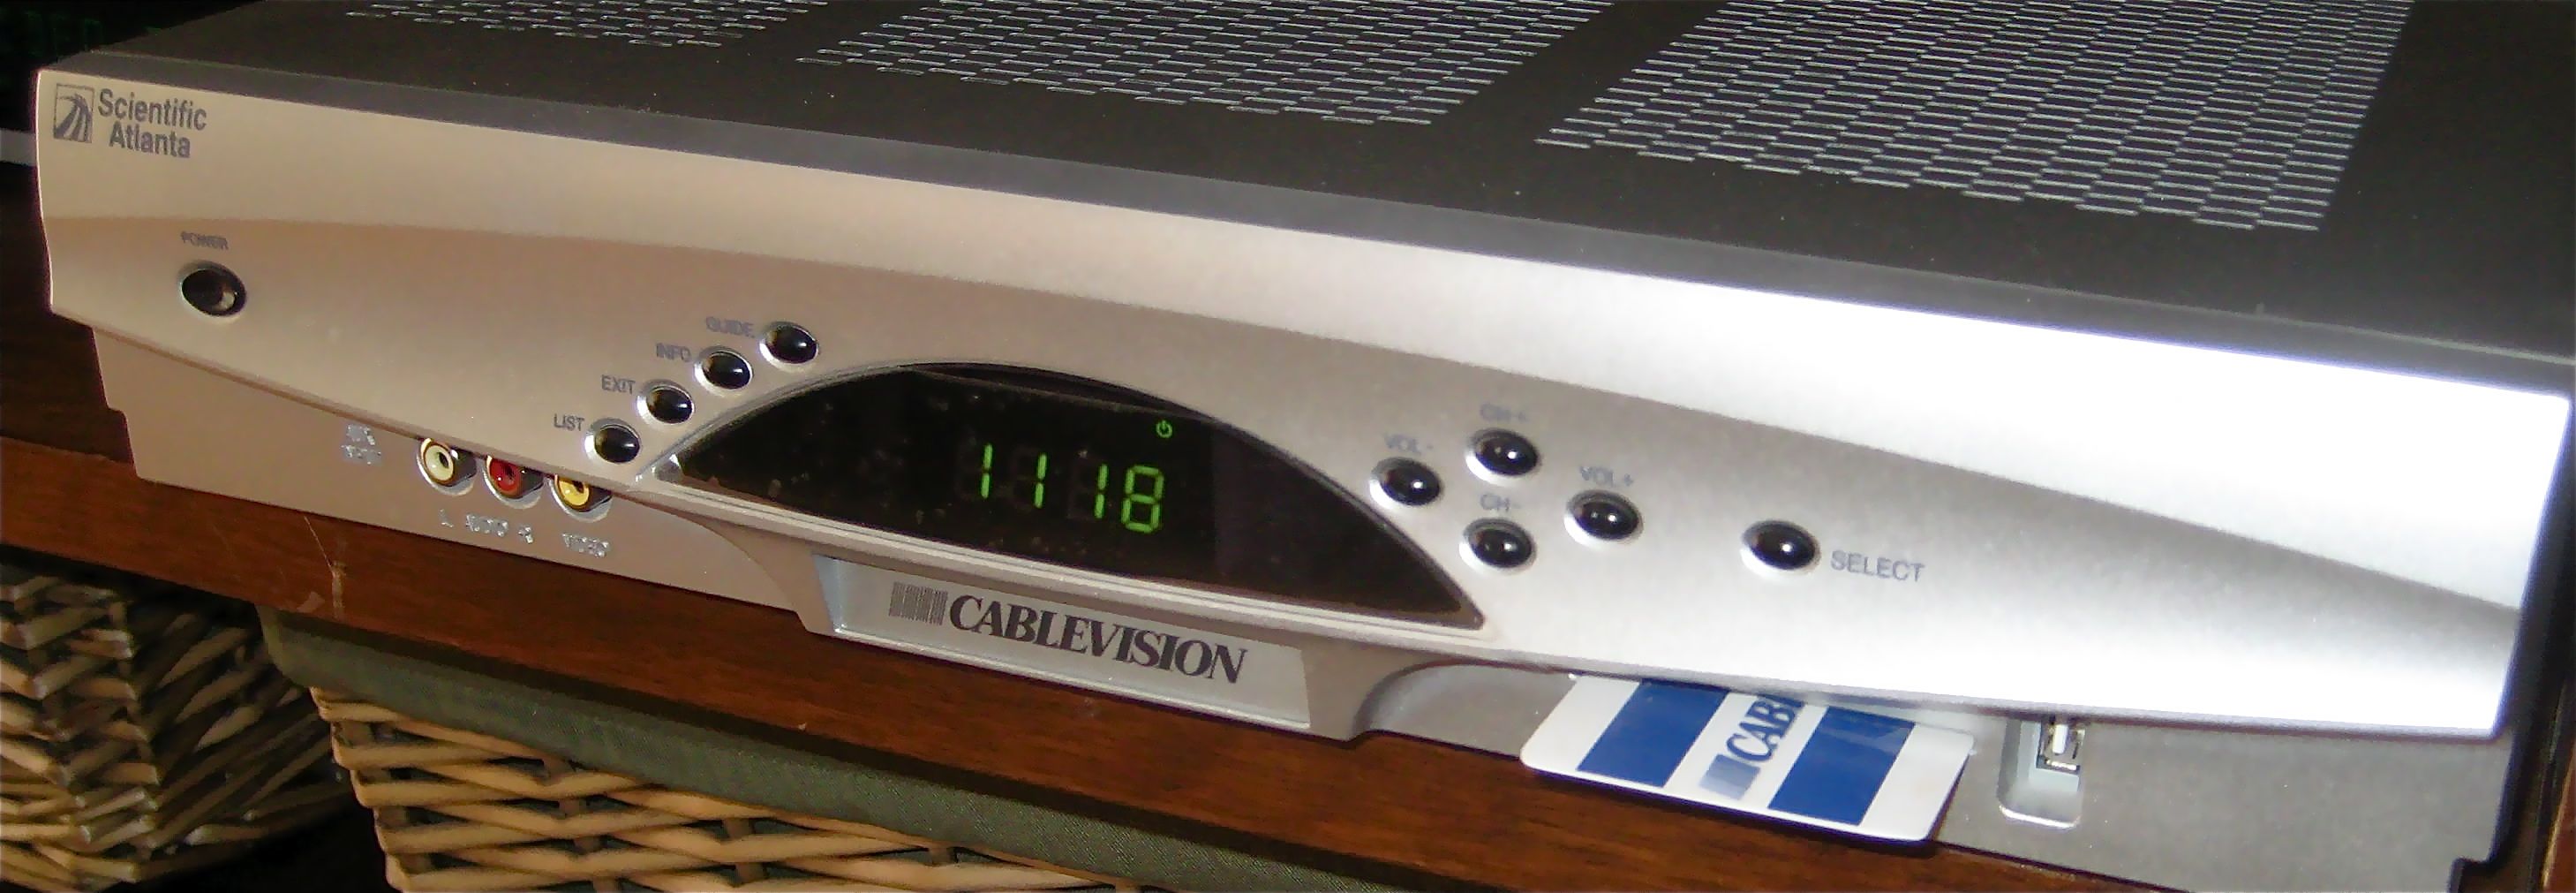 cablevision-box.jpg